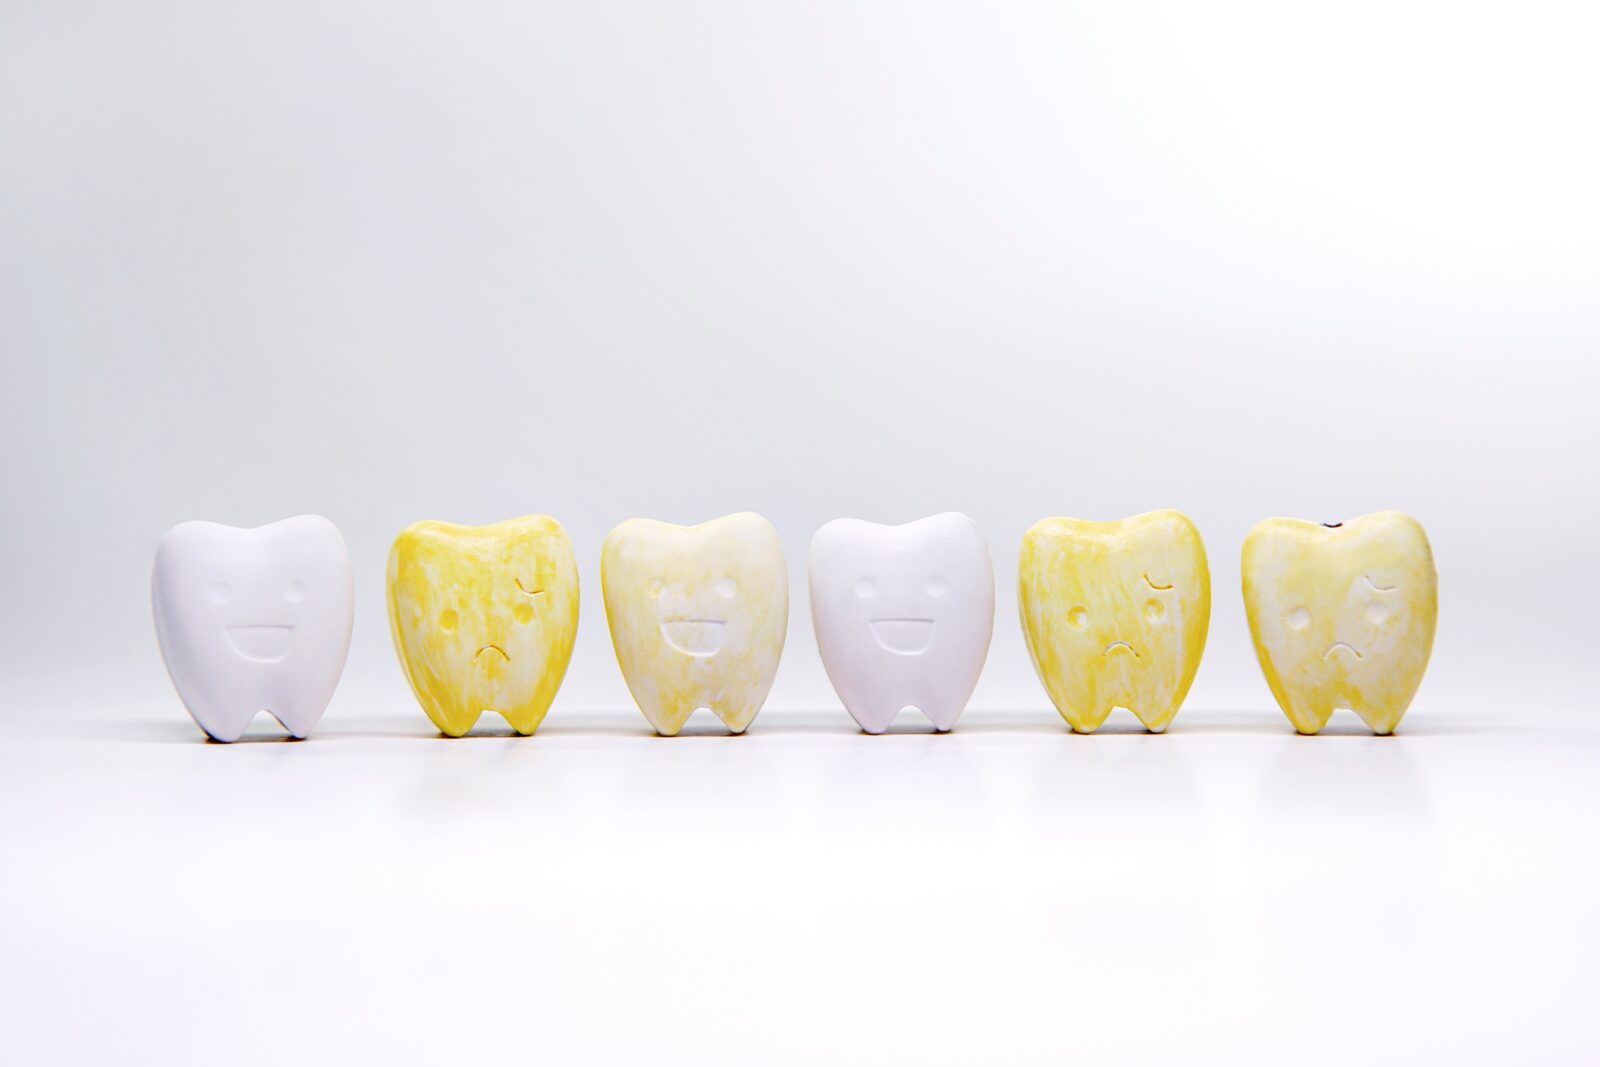 white and yellow teeth candies